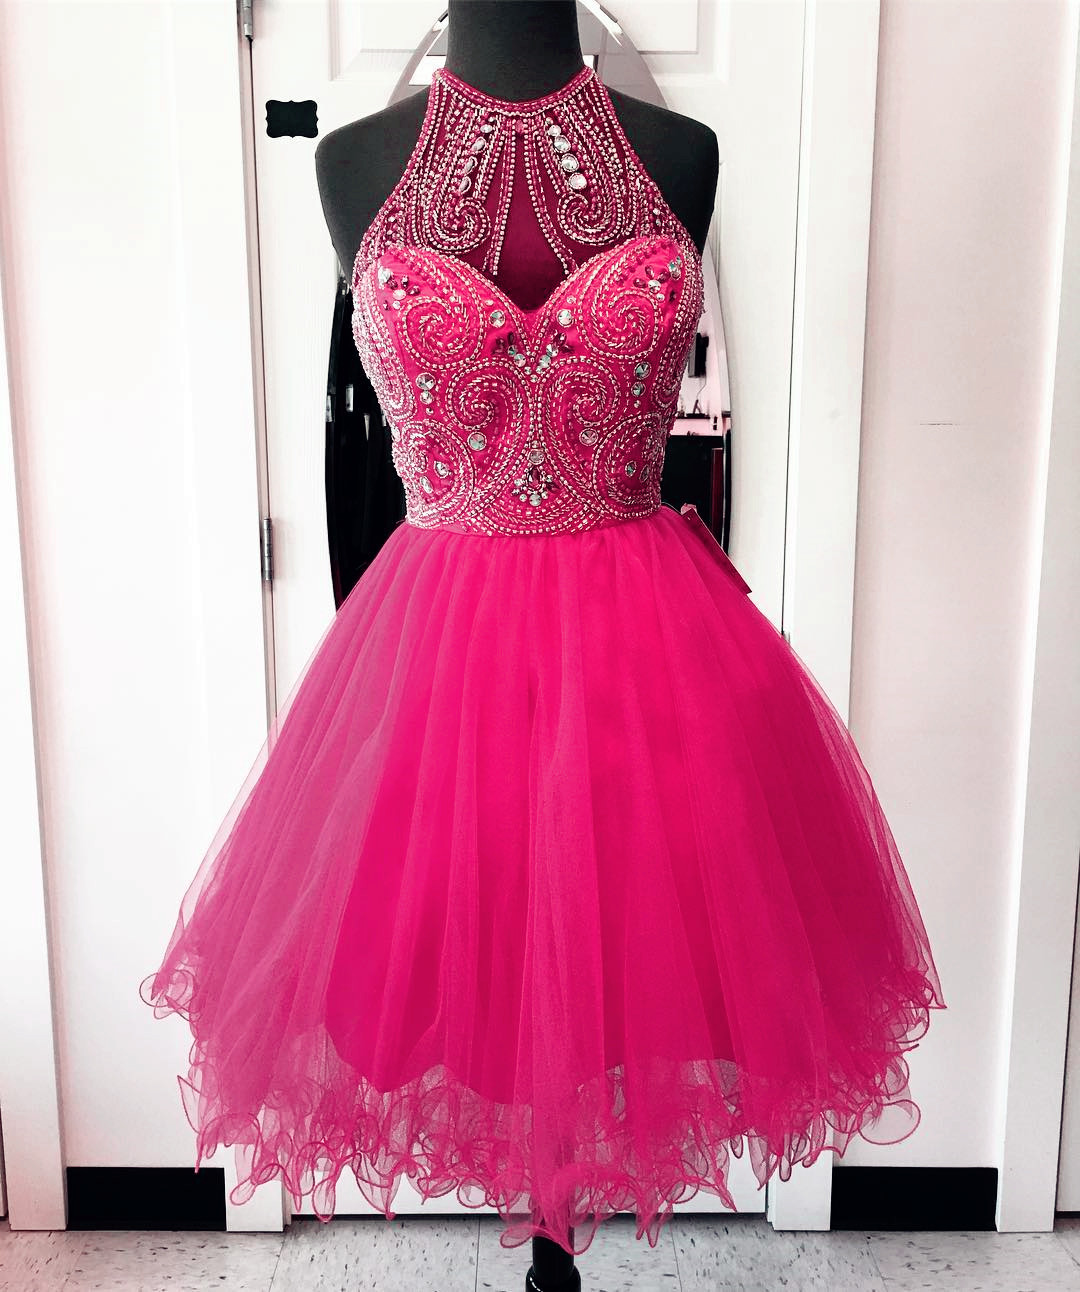 Crystal Beaded Prom Dresses Short,high Neck Homecoming Dresses, Pink Prom Dresses,chic Party Dress,women's Cocktail Dress